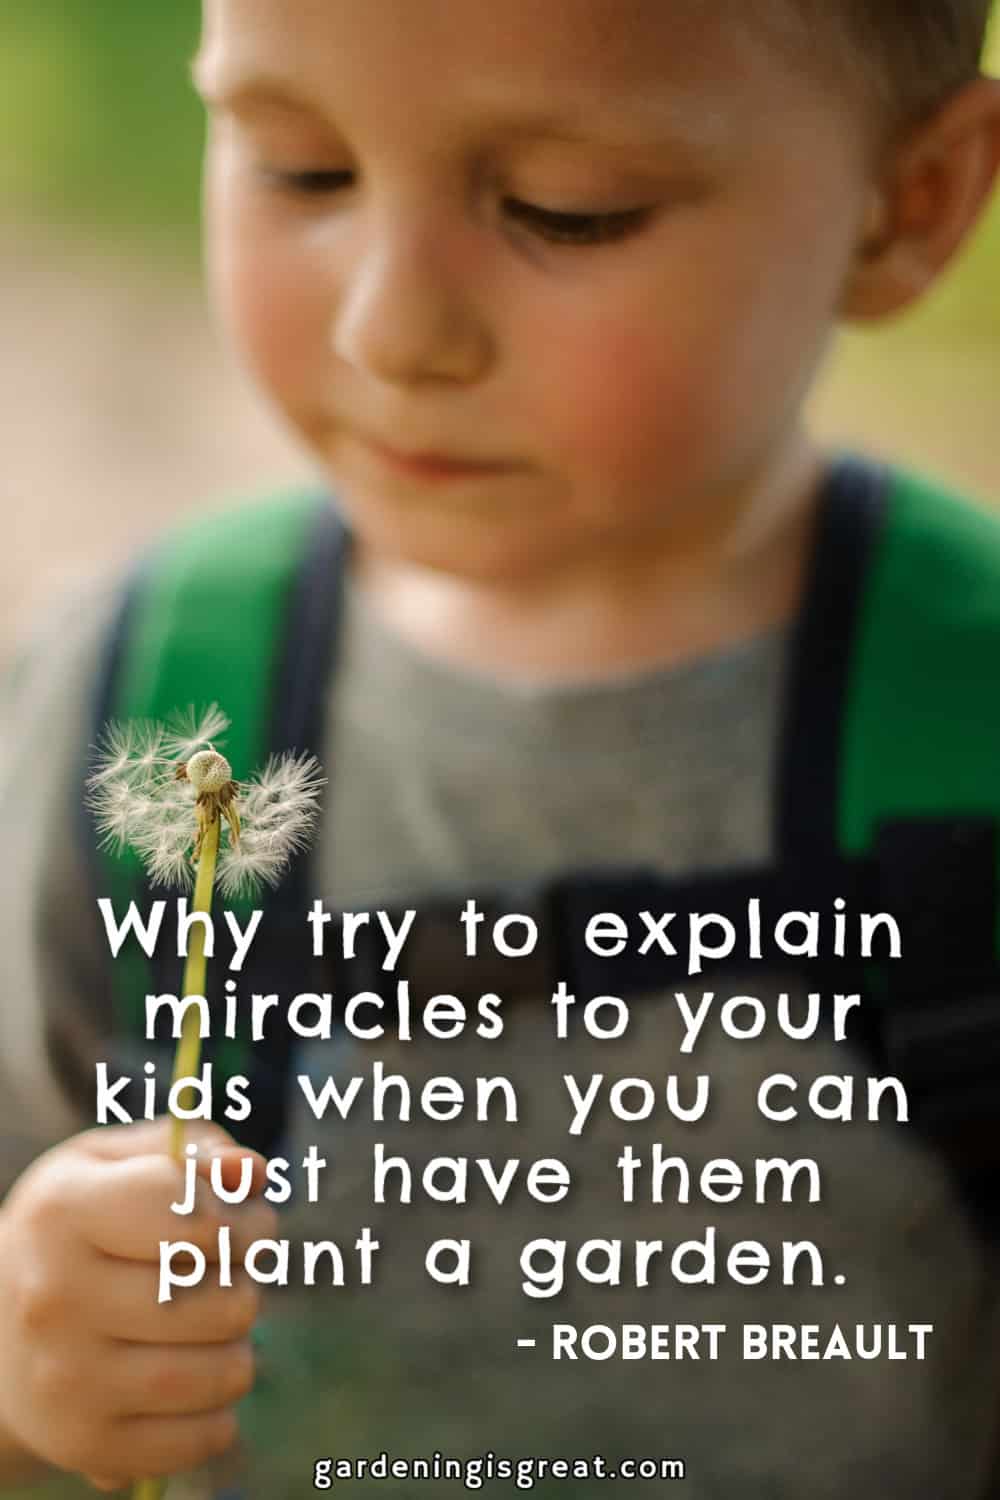 miracles to kids